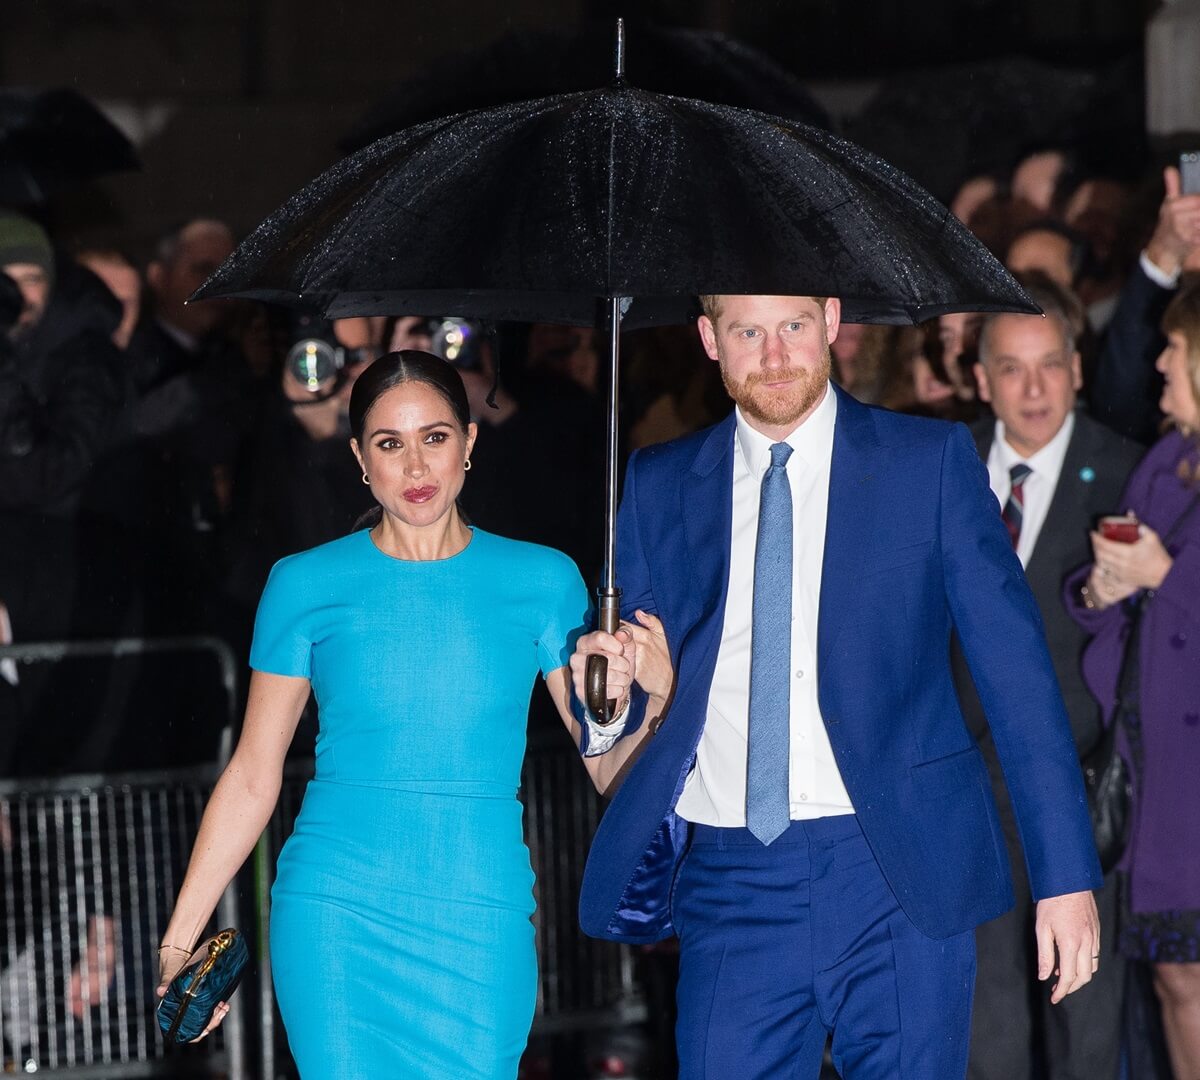 Meghan Markle and Prince Harry attend The Endeavour Fund Awards at Mansion House in London